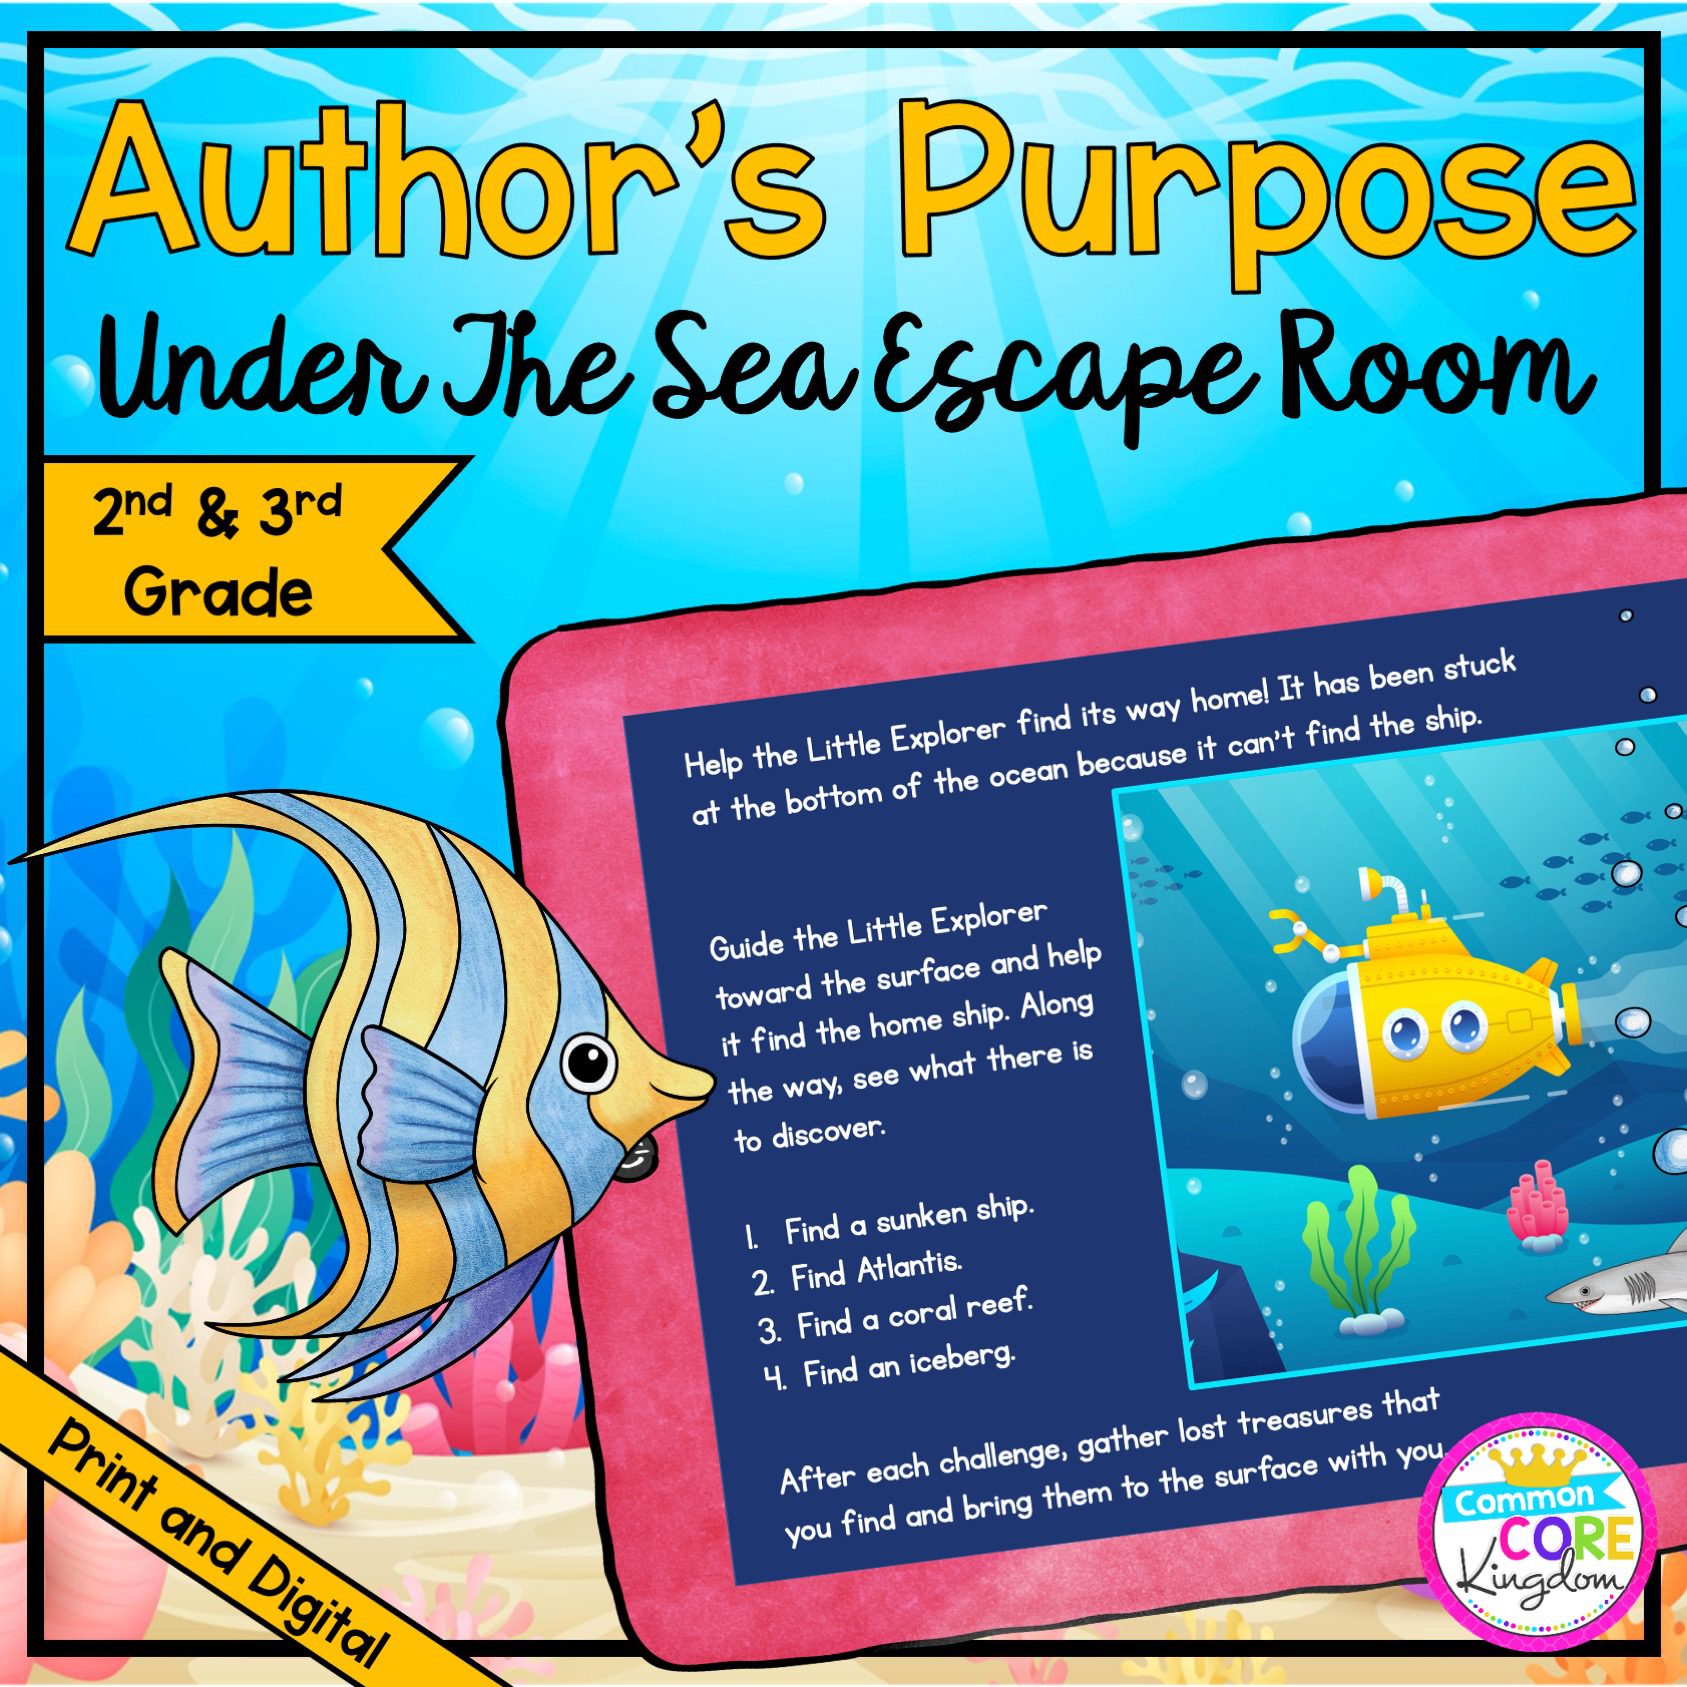 Author's Purpose "Under the Sea" Escape Room for 2nd & 3rd Grade in Digital & Printable Format